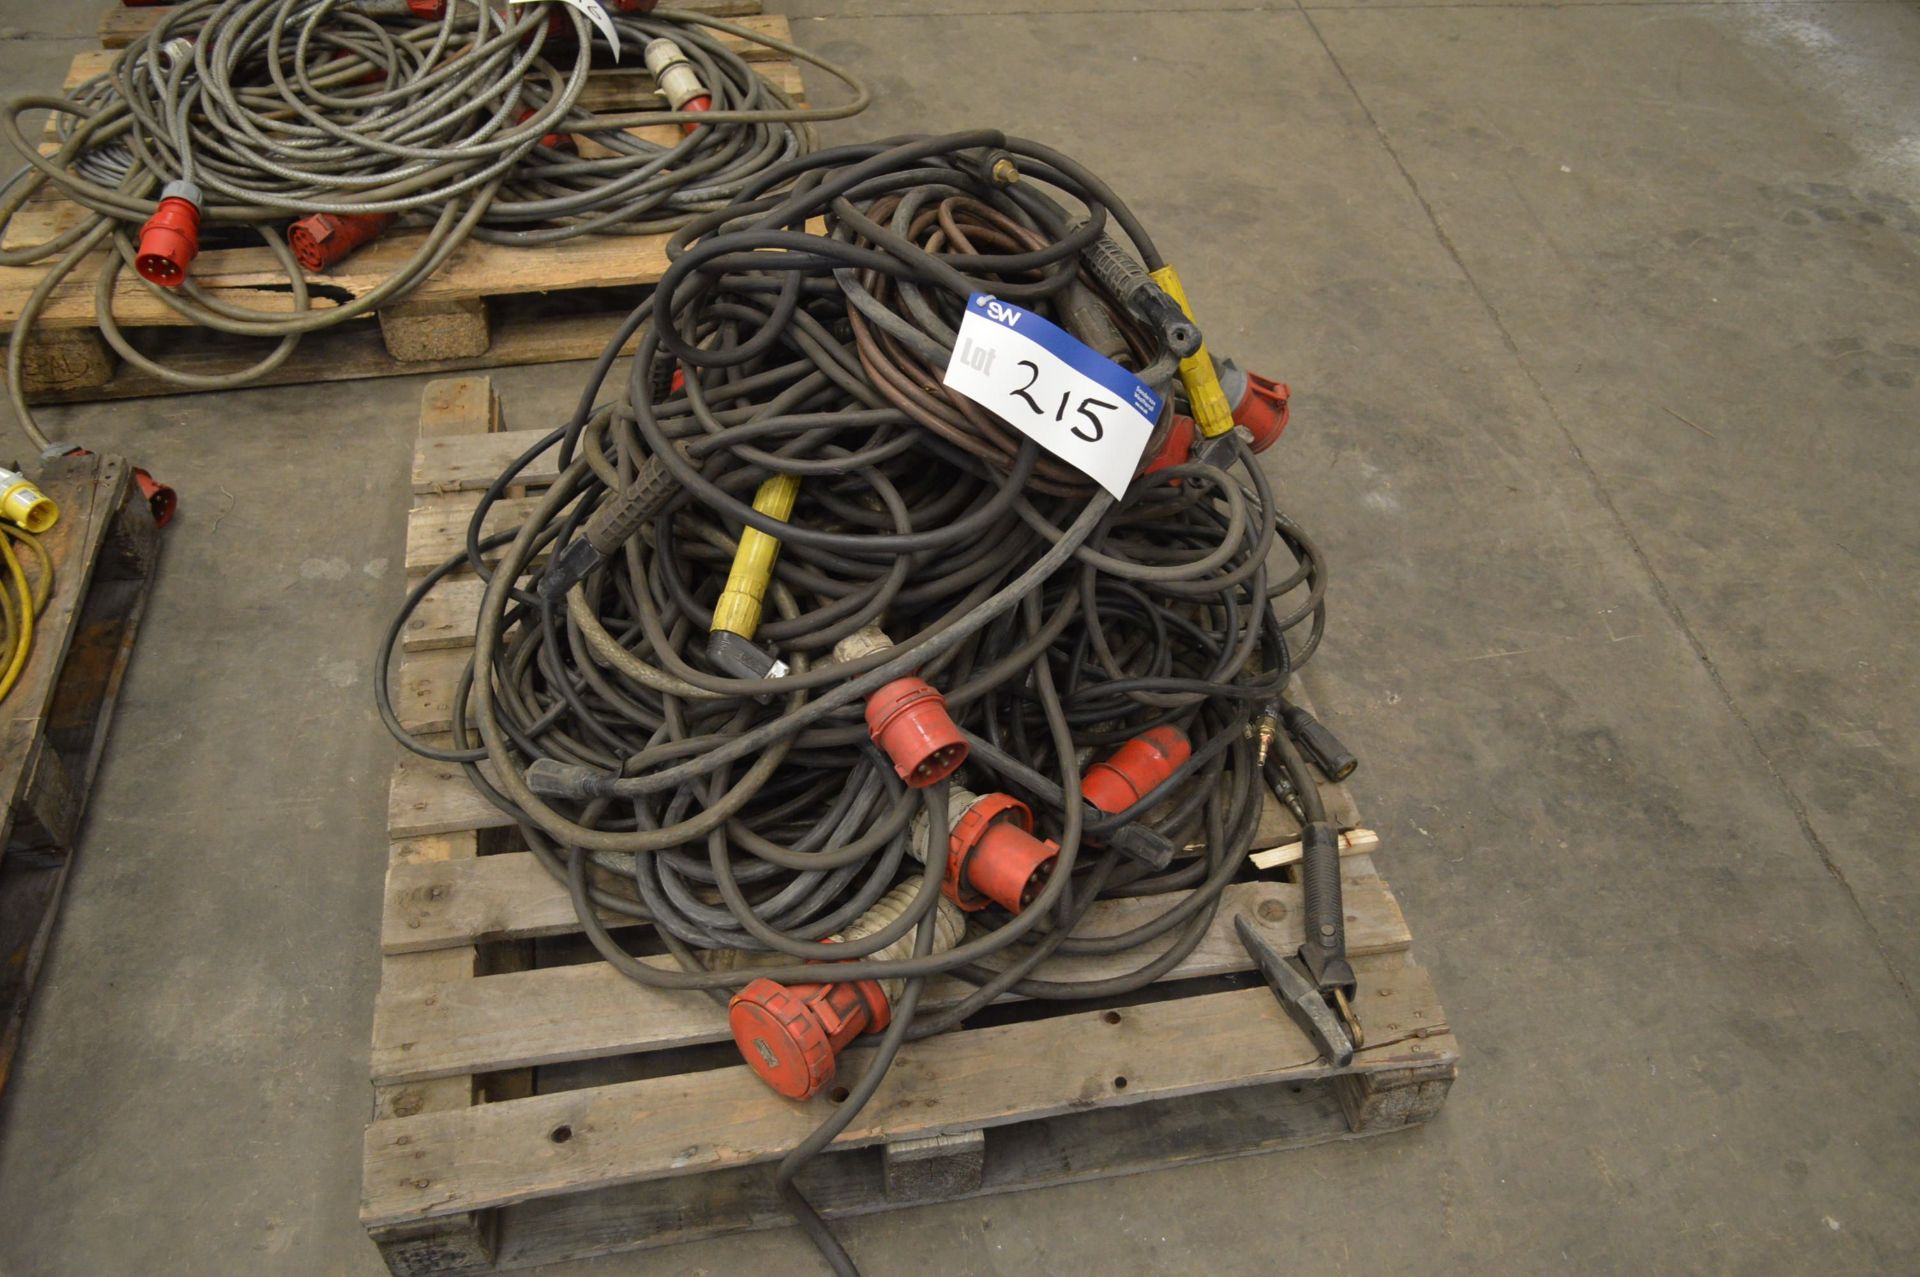 Extension Cables & Electrode Holders/ Leads, on pallet